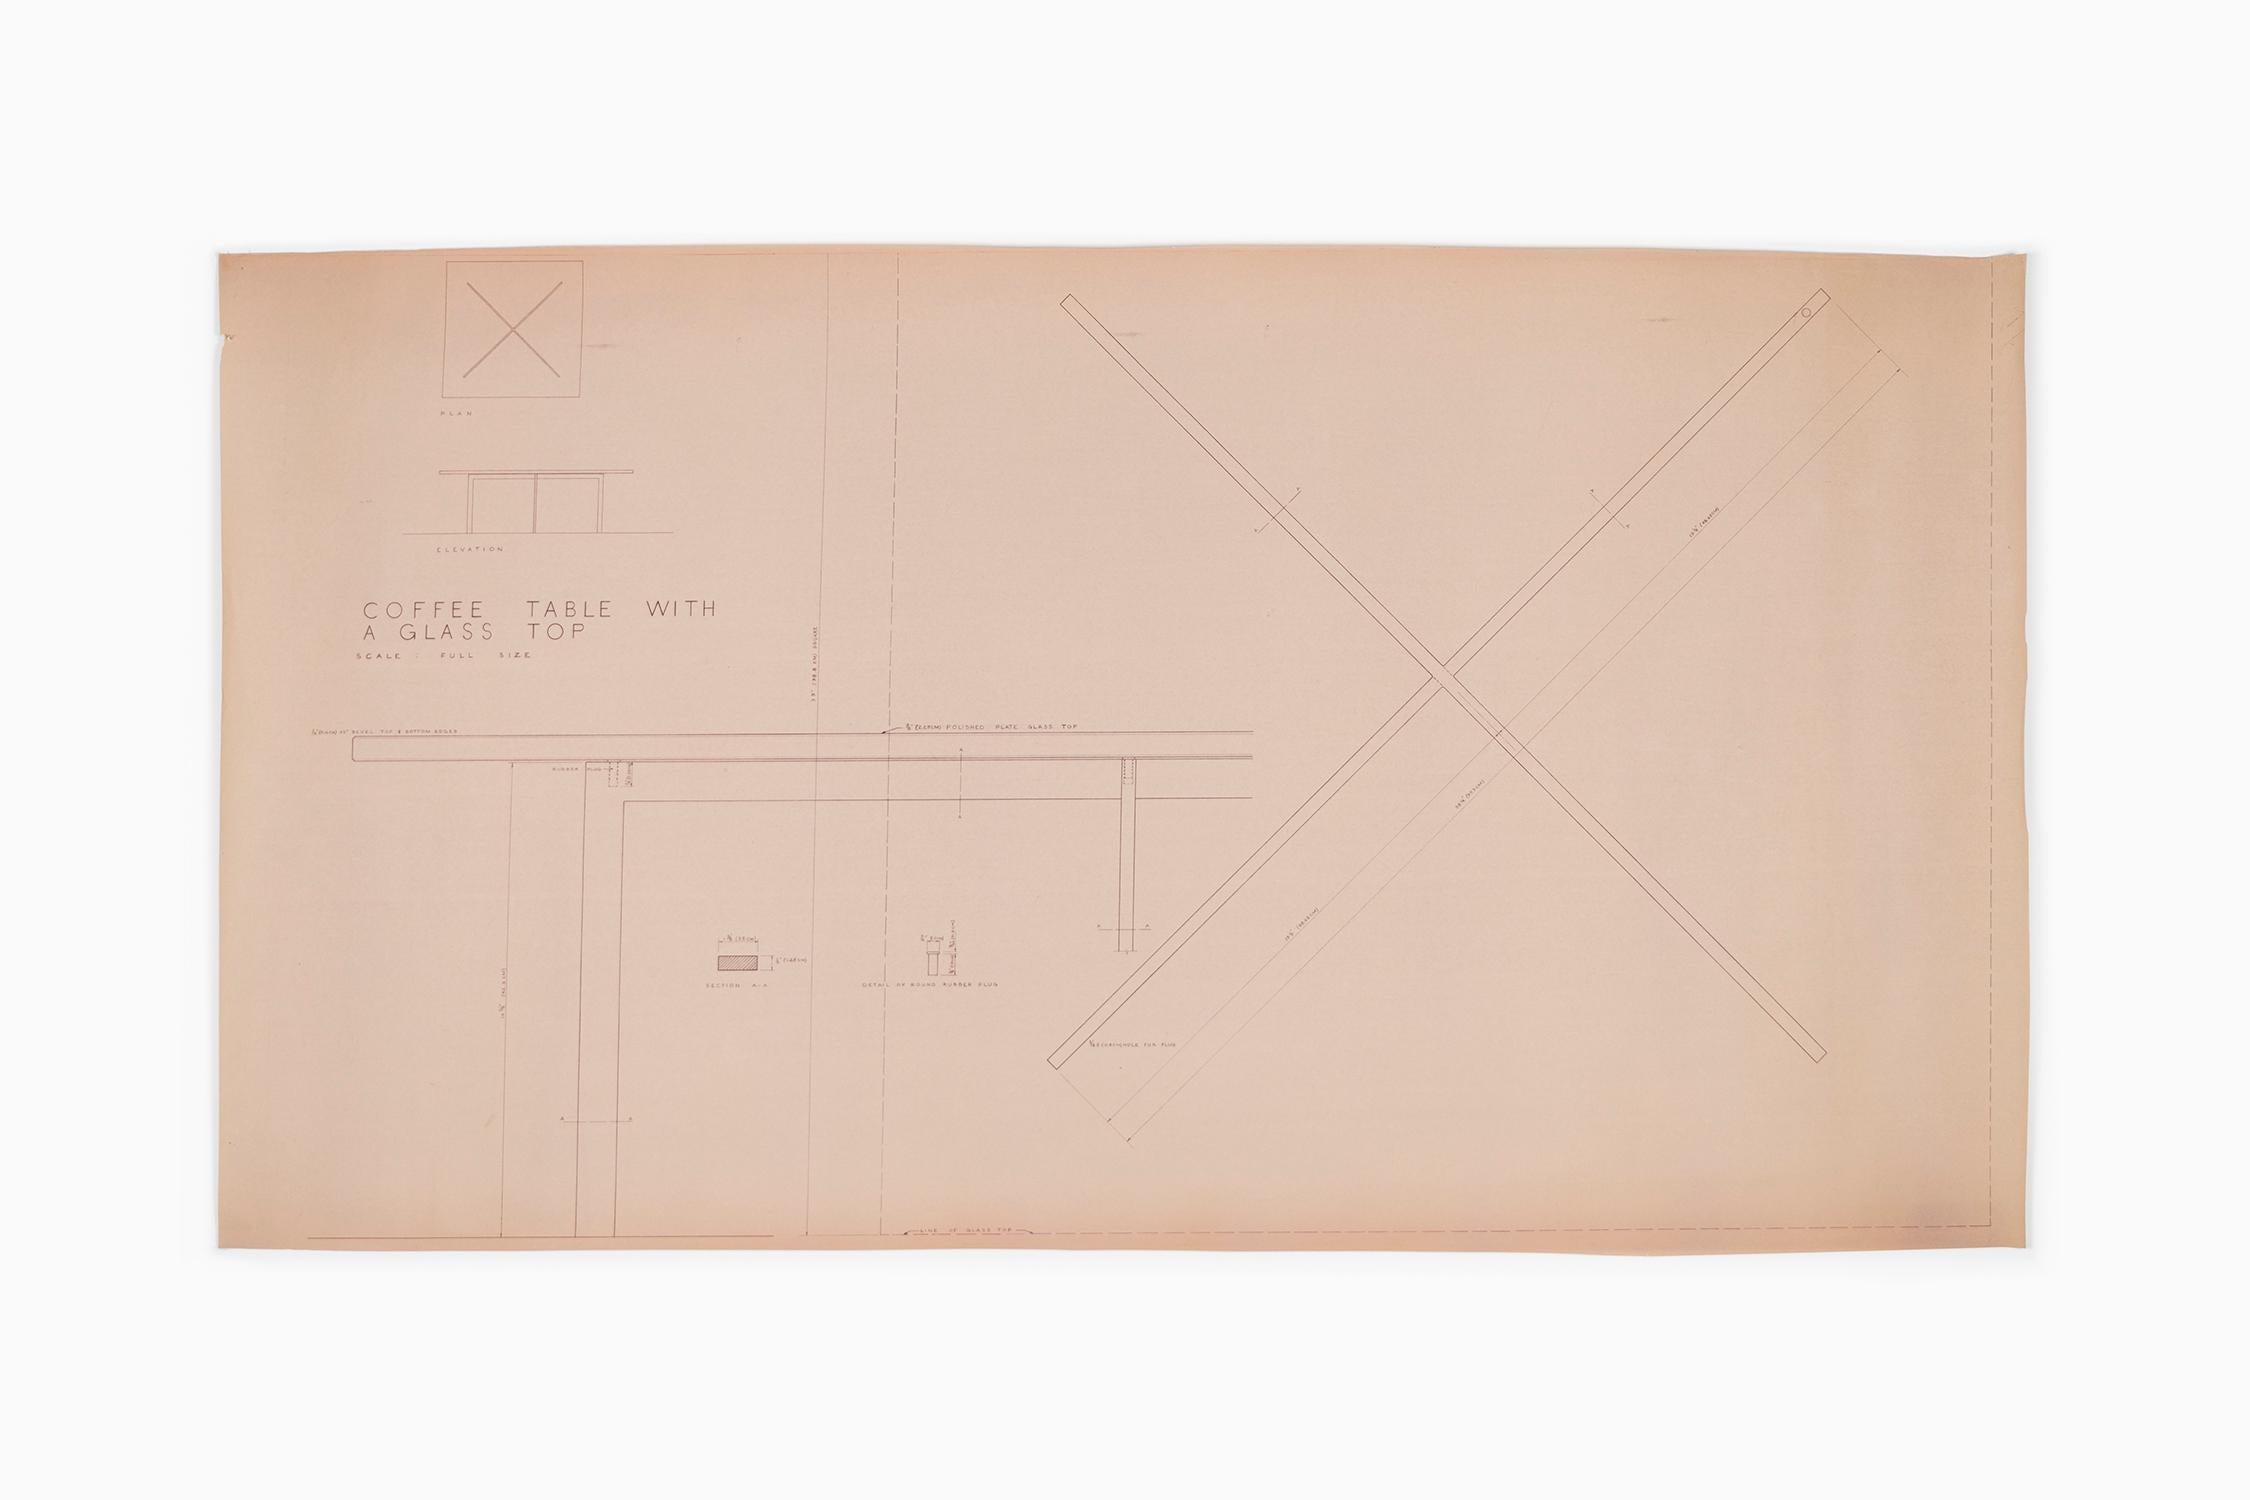 Coffee table design drawing

The Office of Mies van der Rohe

Designed by Ludwig Mies van der Rohe in 1930 for the Tugendhat House in Brno, Czechoslovakia

Delineated by Edward A. Duckett, circa 1950s

Blue line print

Measures: 35 ½” H x